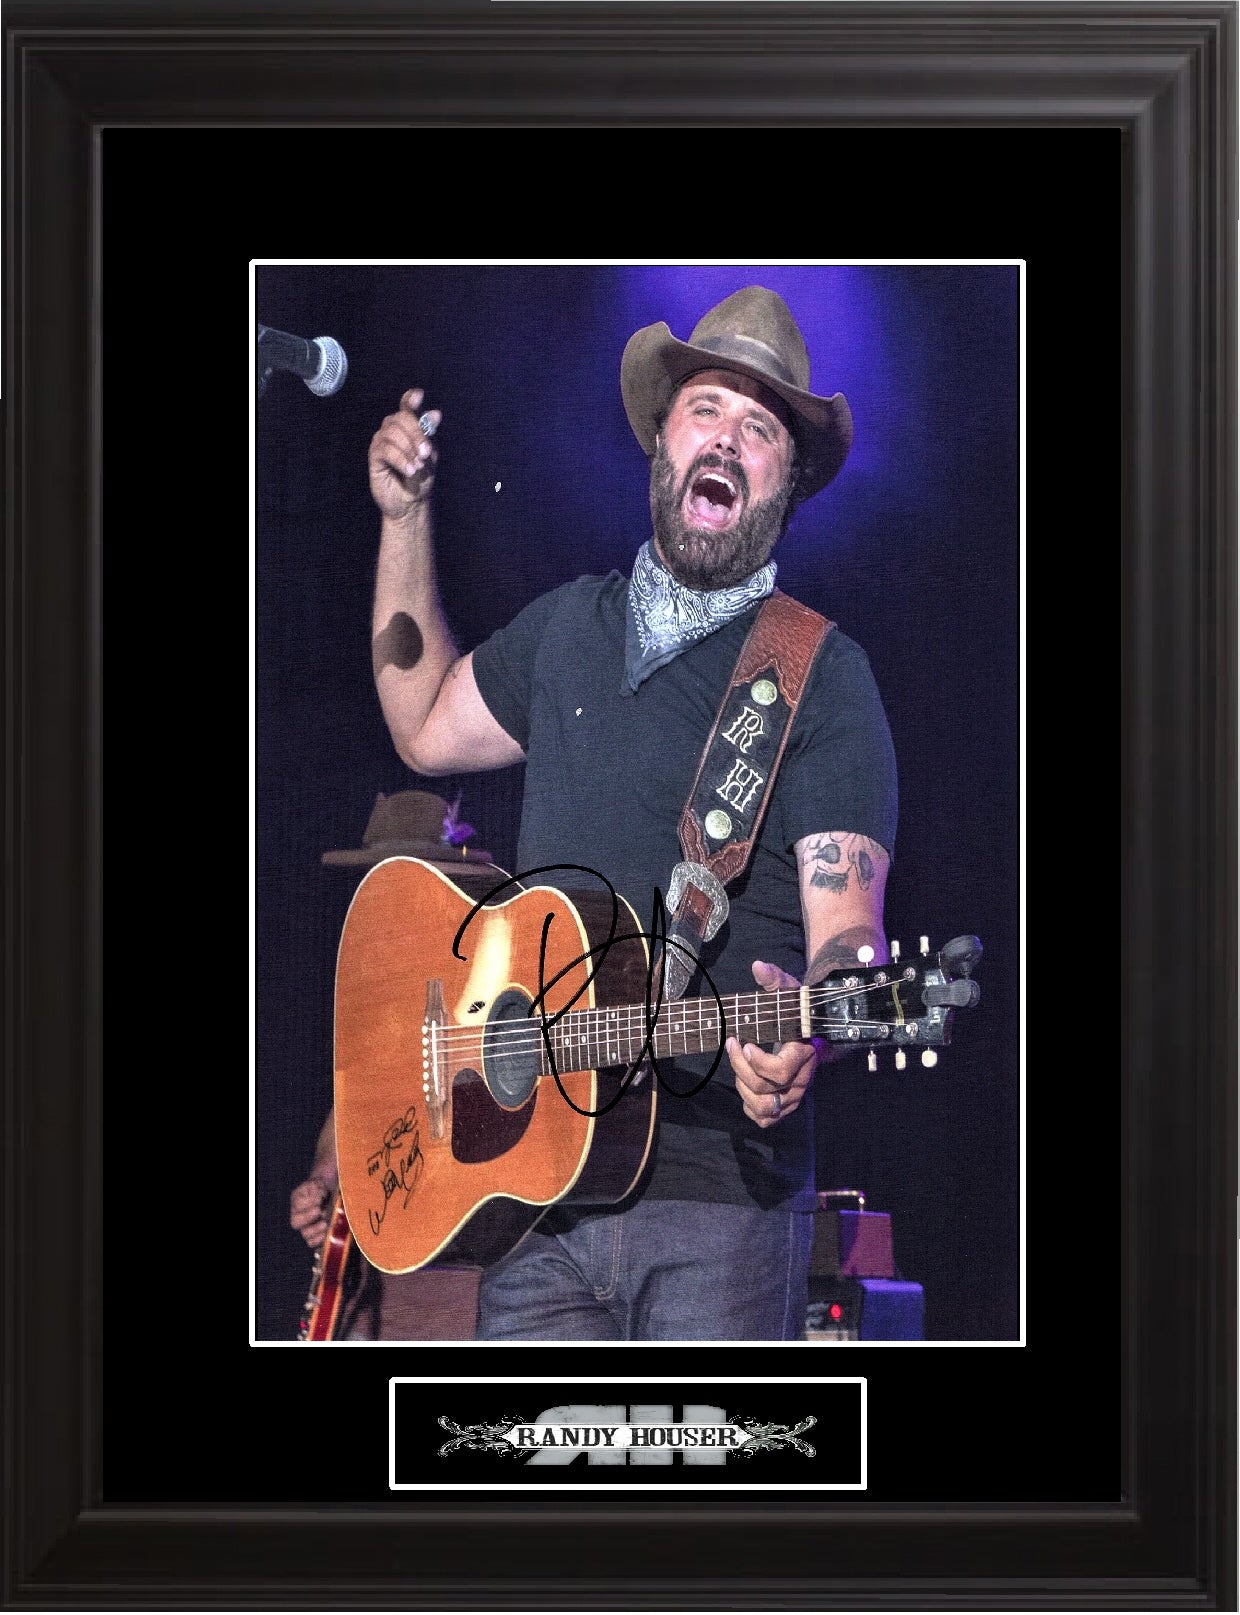 Randy Houser Autographed Photo - Zion Graphic Collectibles